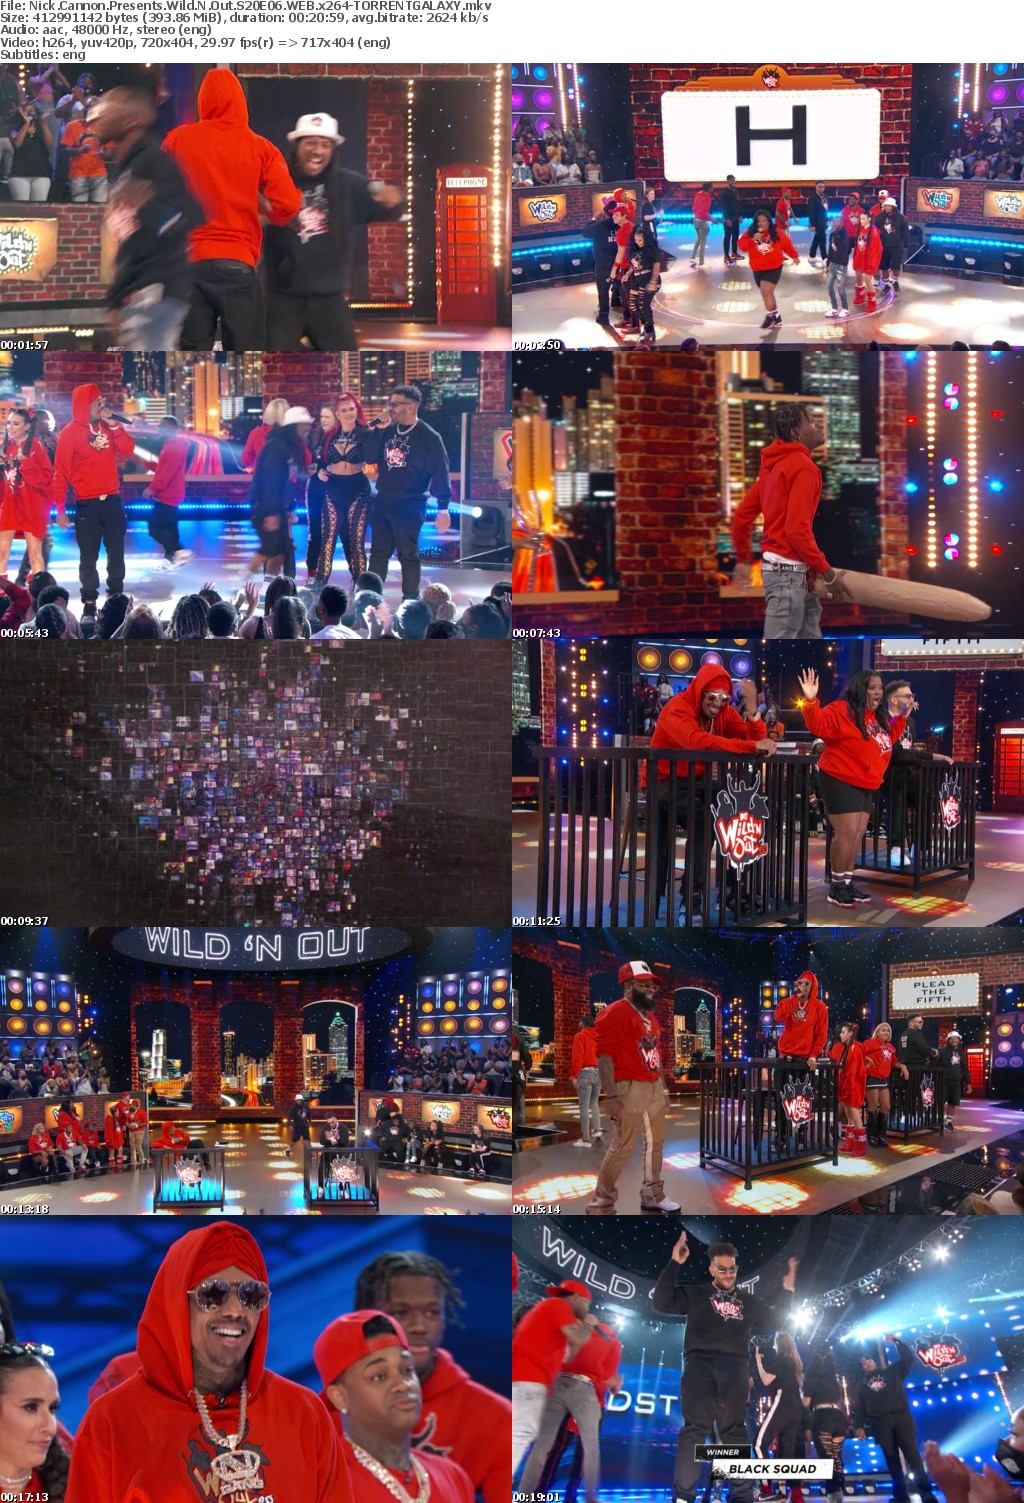 Nick Cannon Presents Wild N Out S20E06 WEB x264-GALAXY